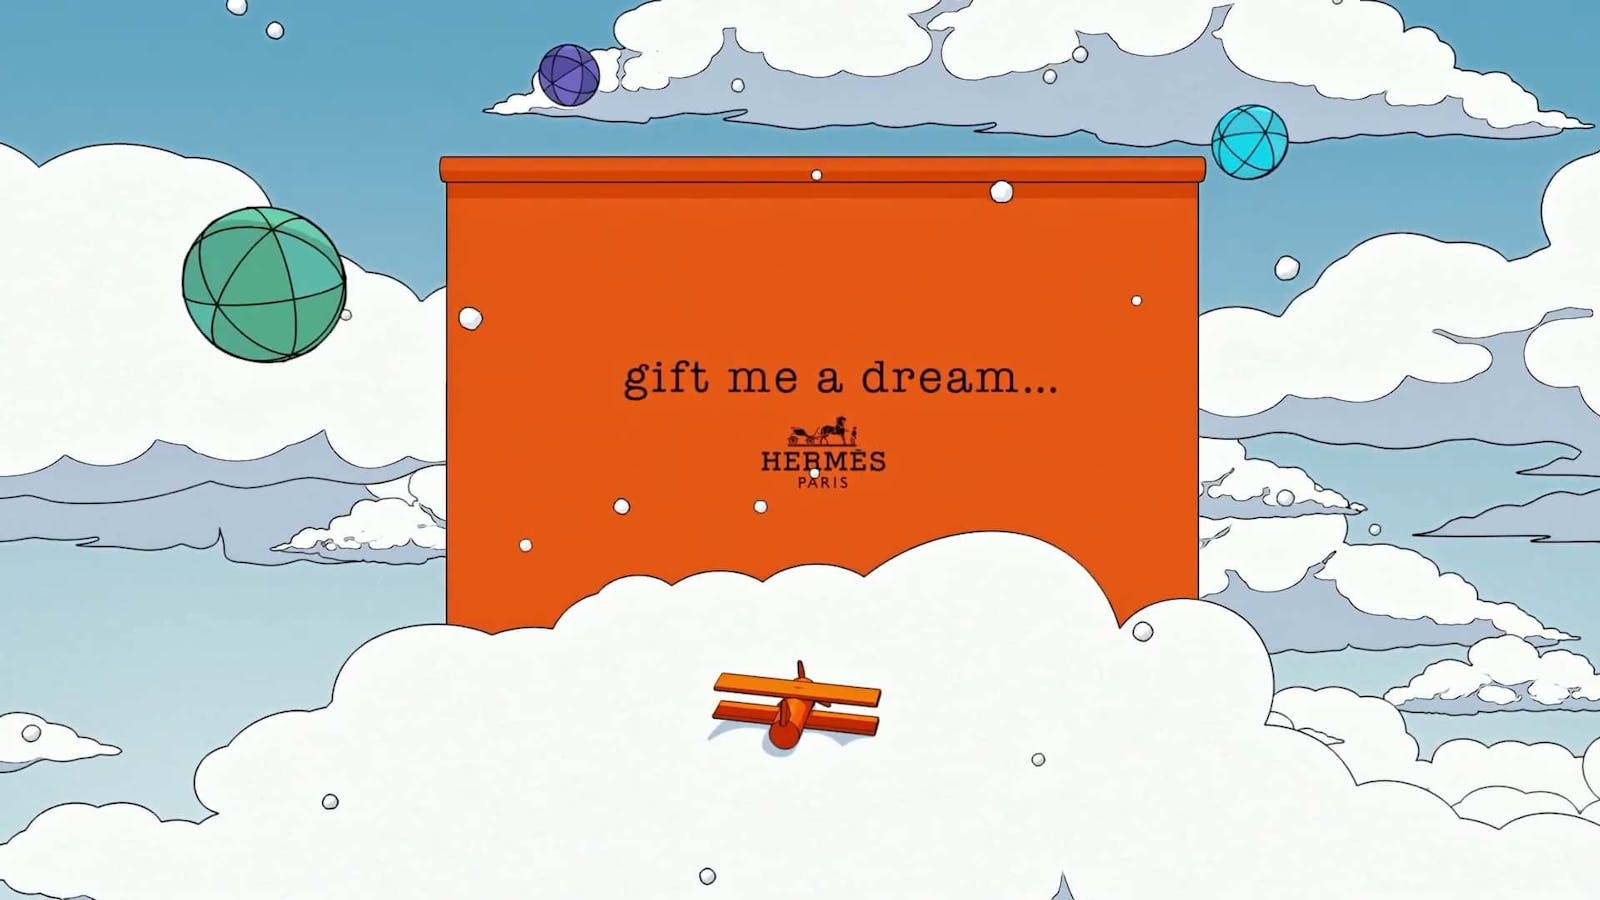 hermes gift me a dream preview a plane on top of a cloud